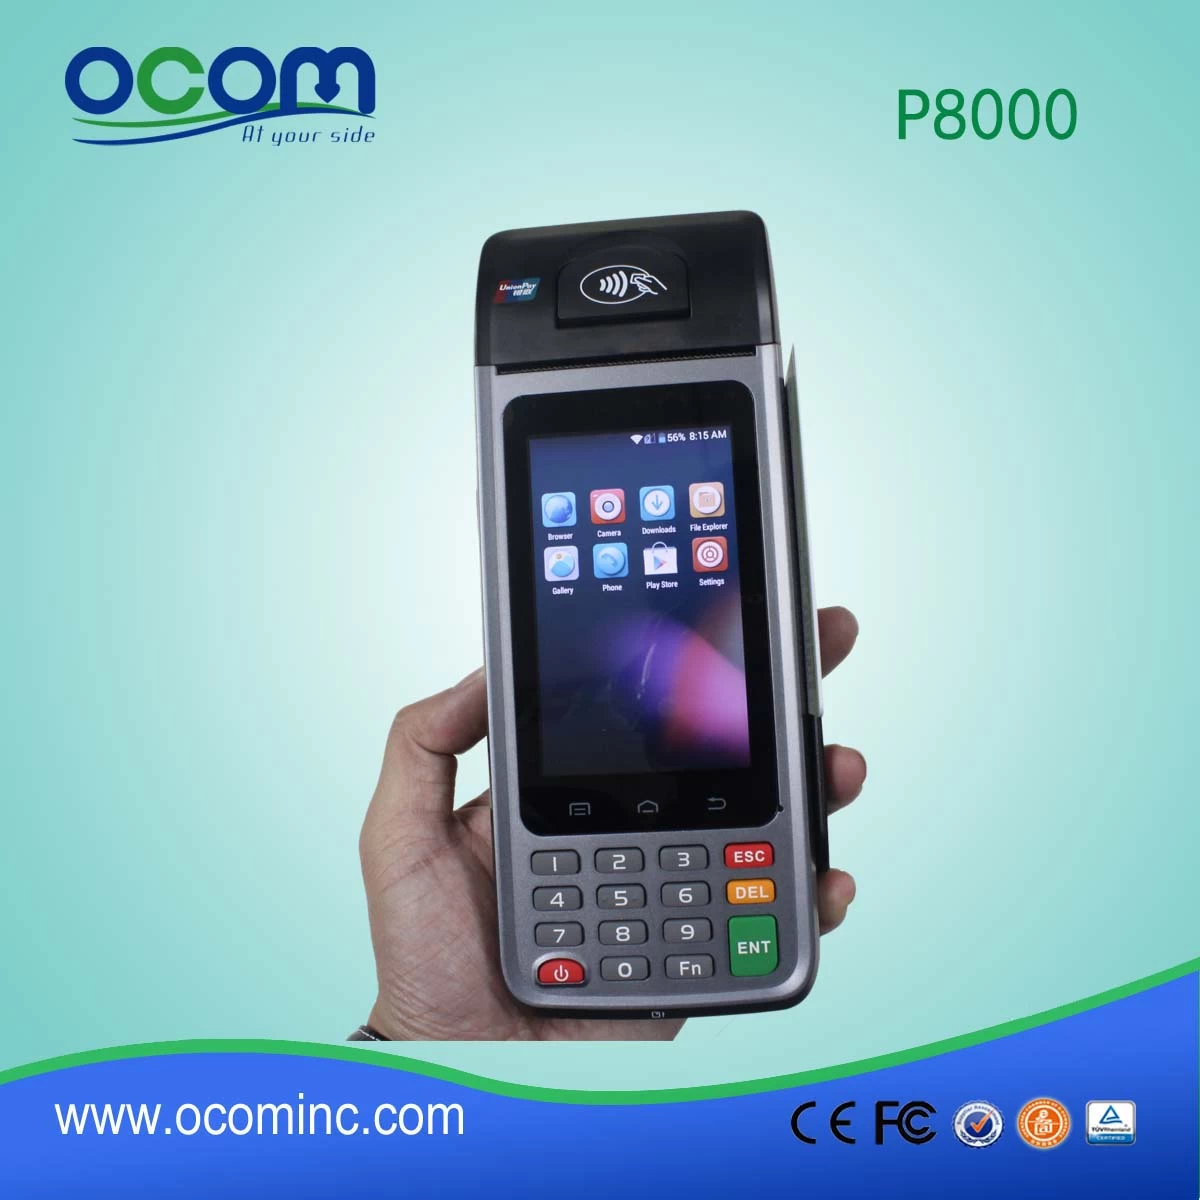 (P8000) Handheld Android POS Terminal with payment function